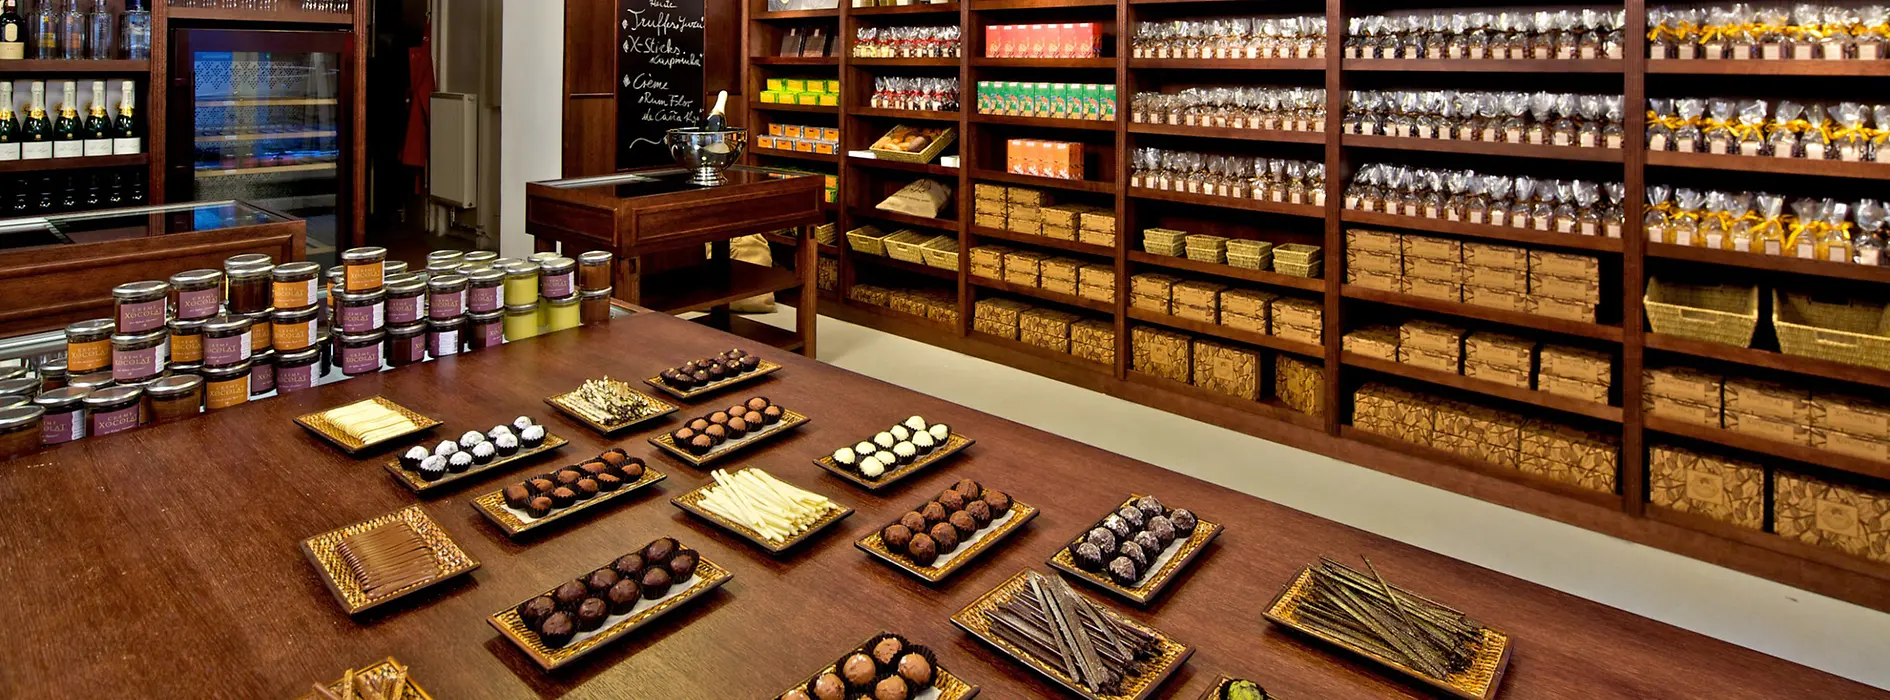 Assorted confectionery at the Xocolat chocolate factory